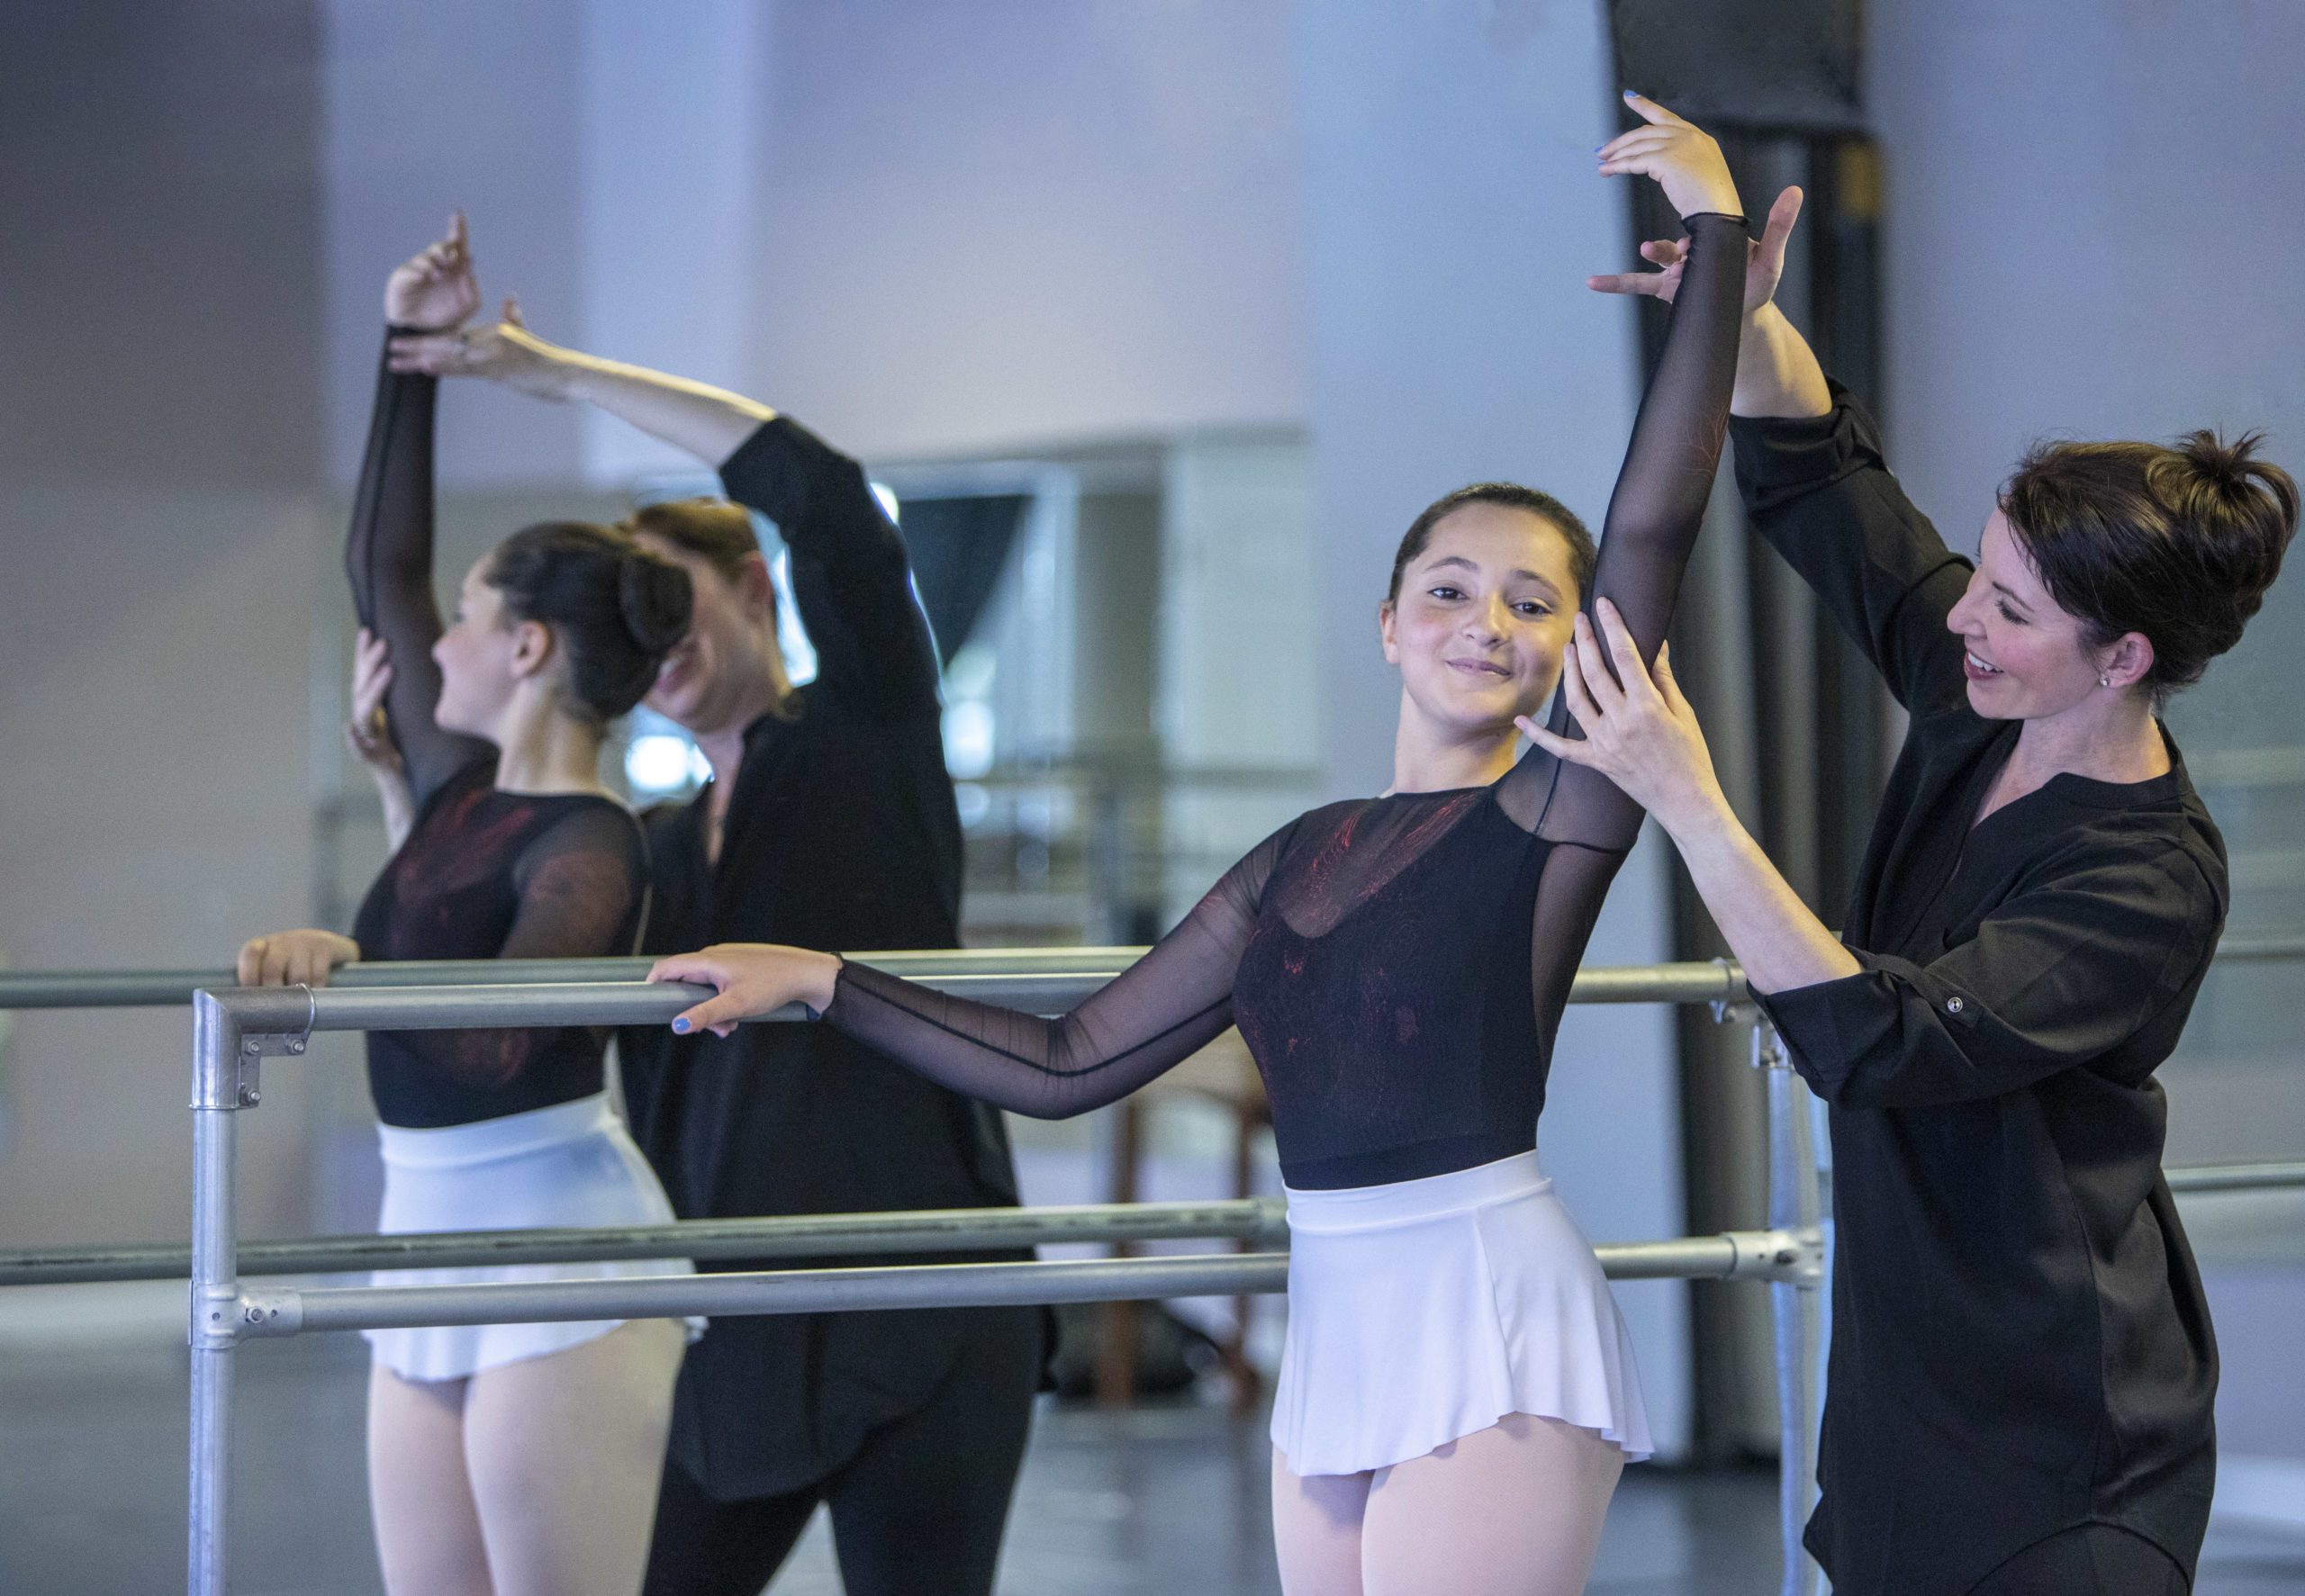 A young ballet student stands at the barre with one arm up in fifth position. She is wearing a black long sleeve leotard and a white ballet skirt. Amy Lowe stands next to her correcting her position, dressed in all black and looking towards her.